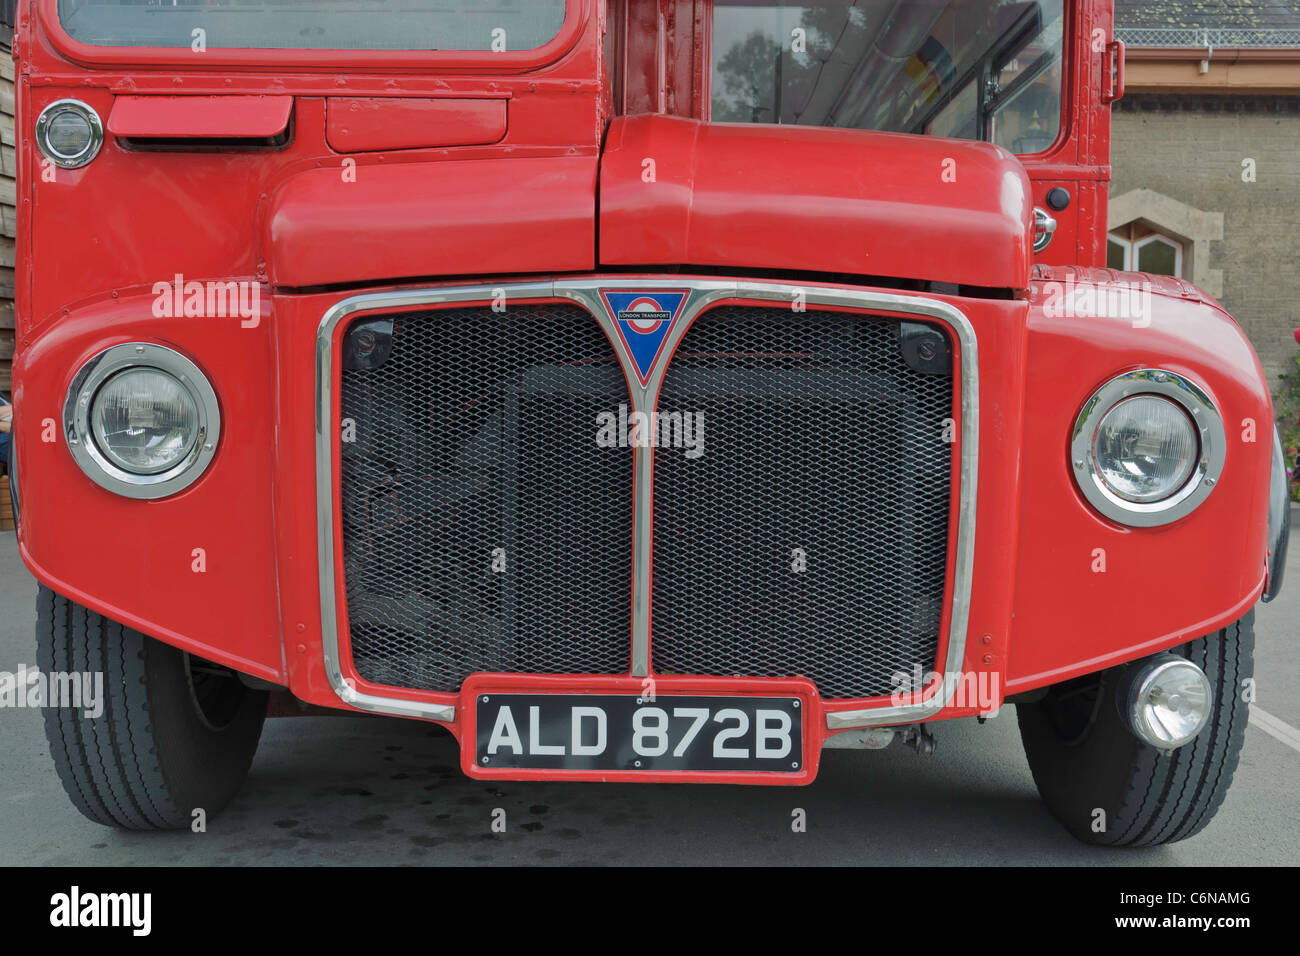 Close Up Detail des Londoner Routemaster Bus RM 1872 Stockfoto